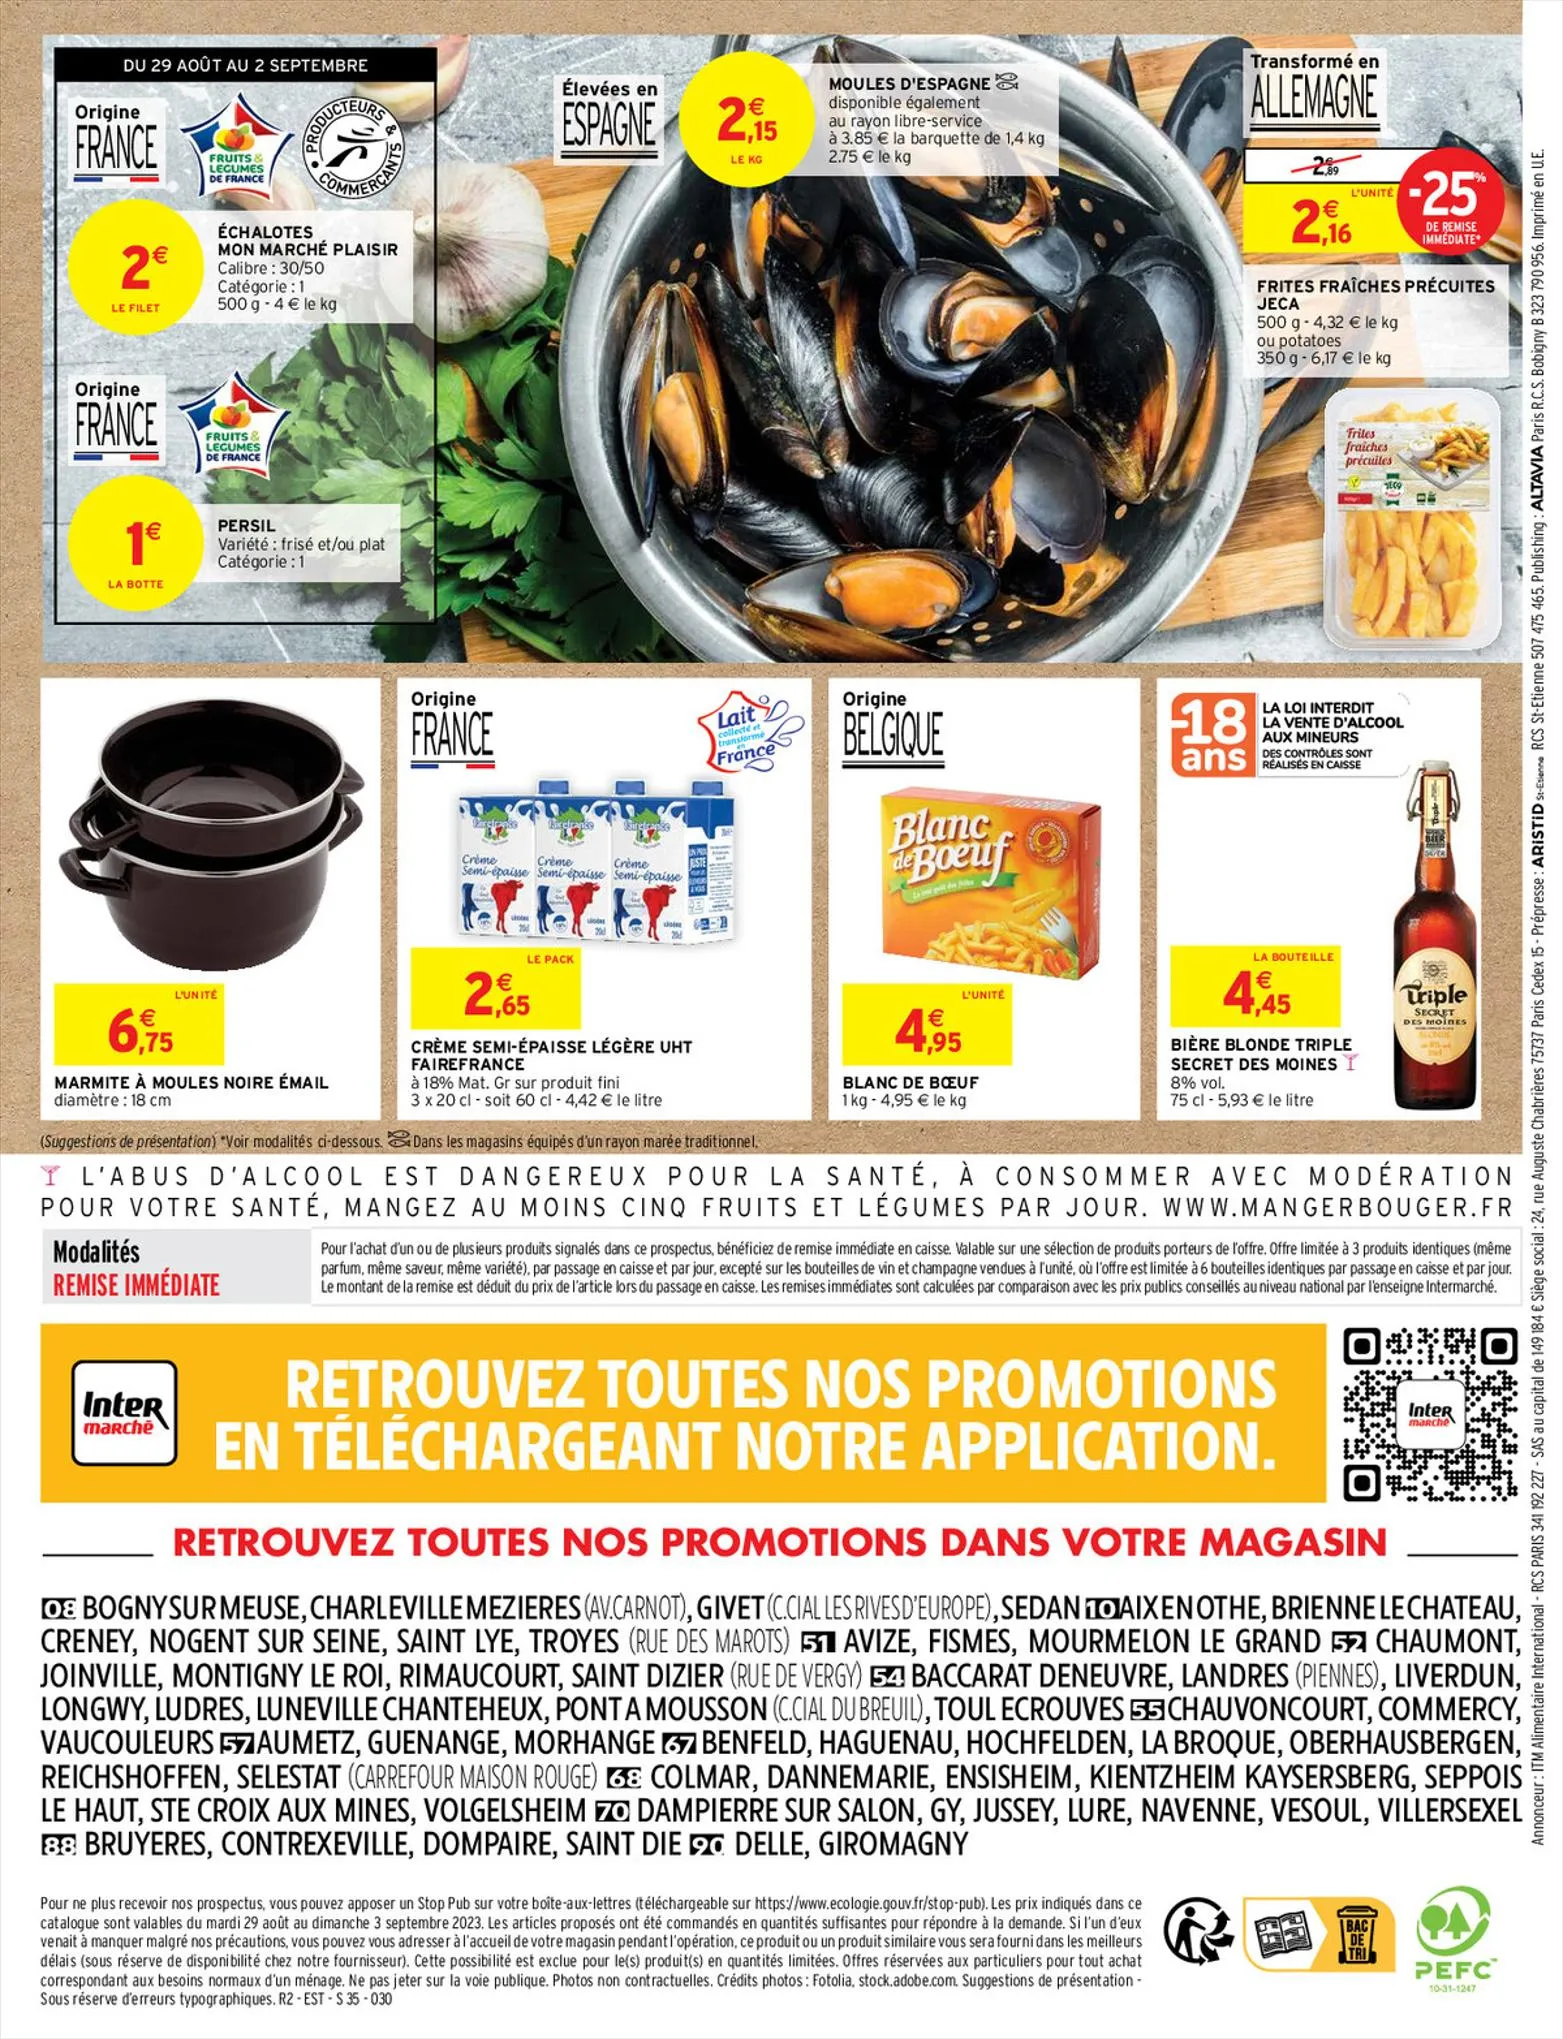 Catalogue S35 - R2 - MOULES FRITES, page 00002